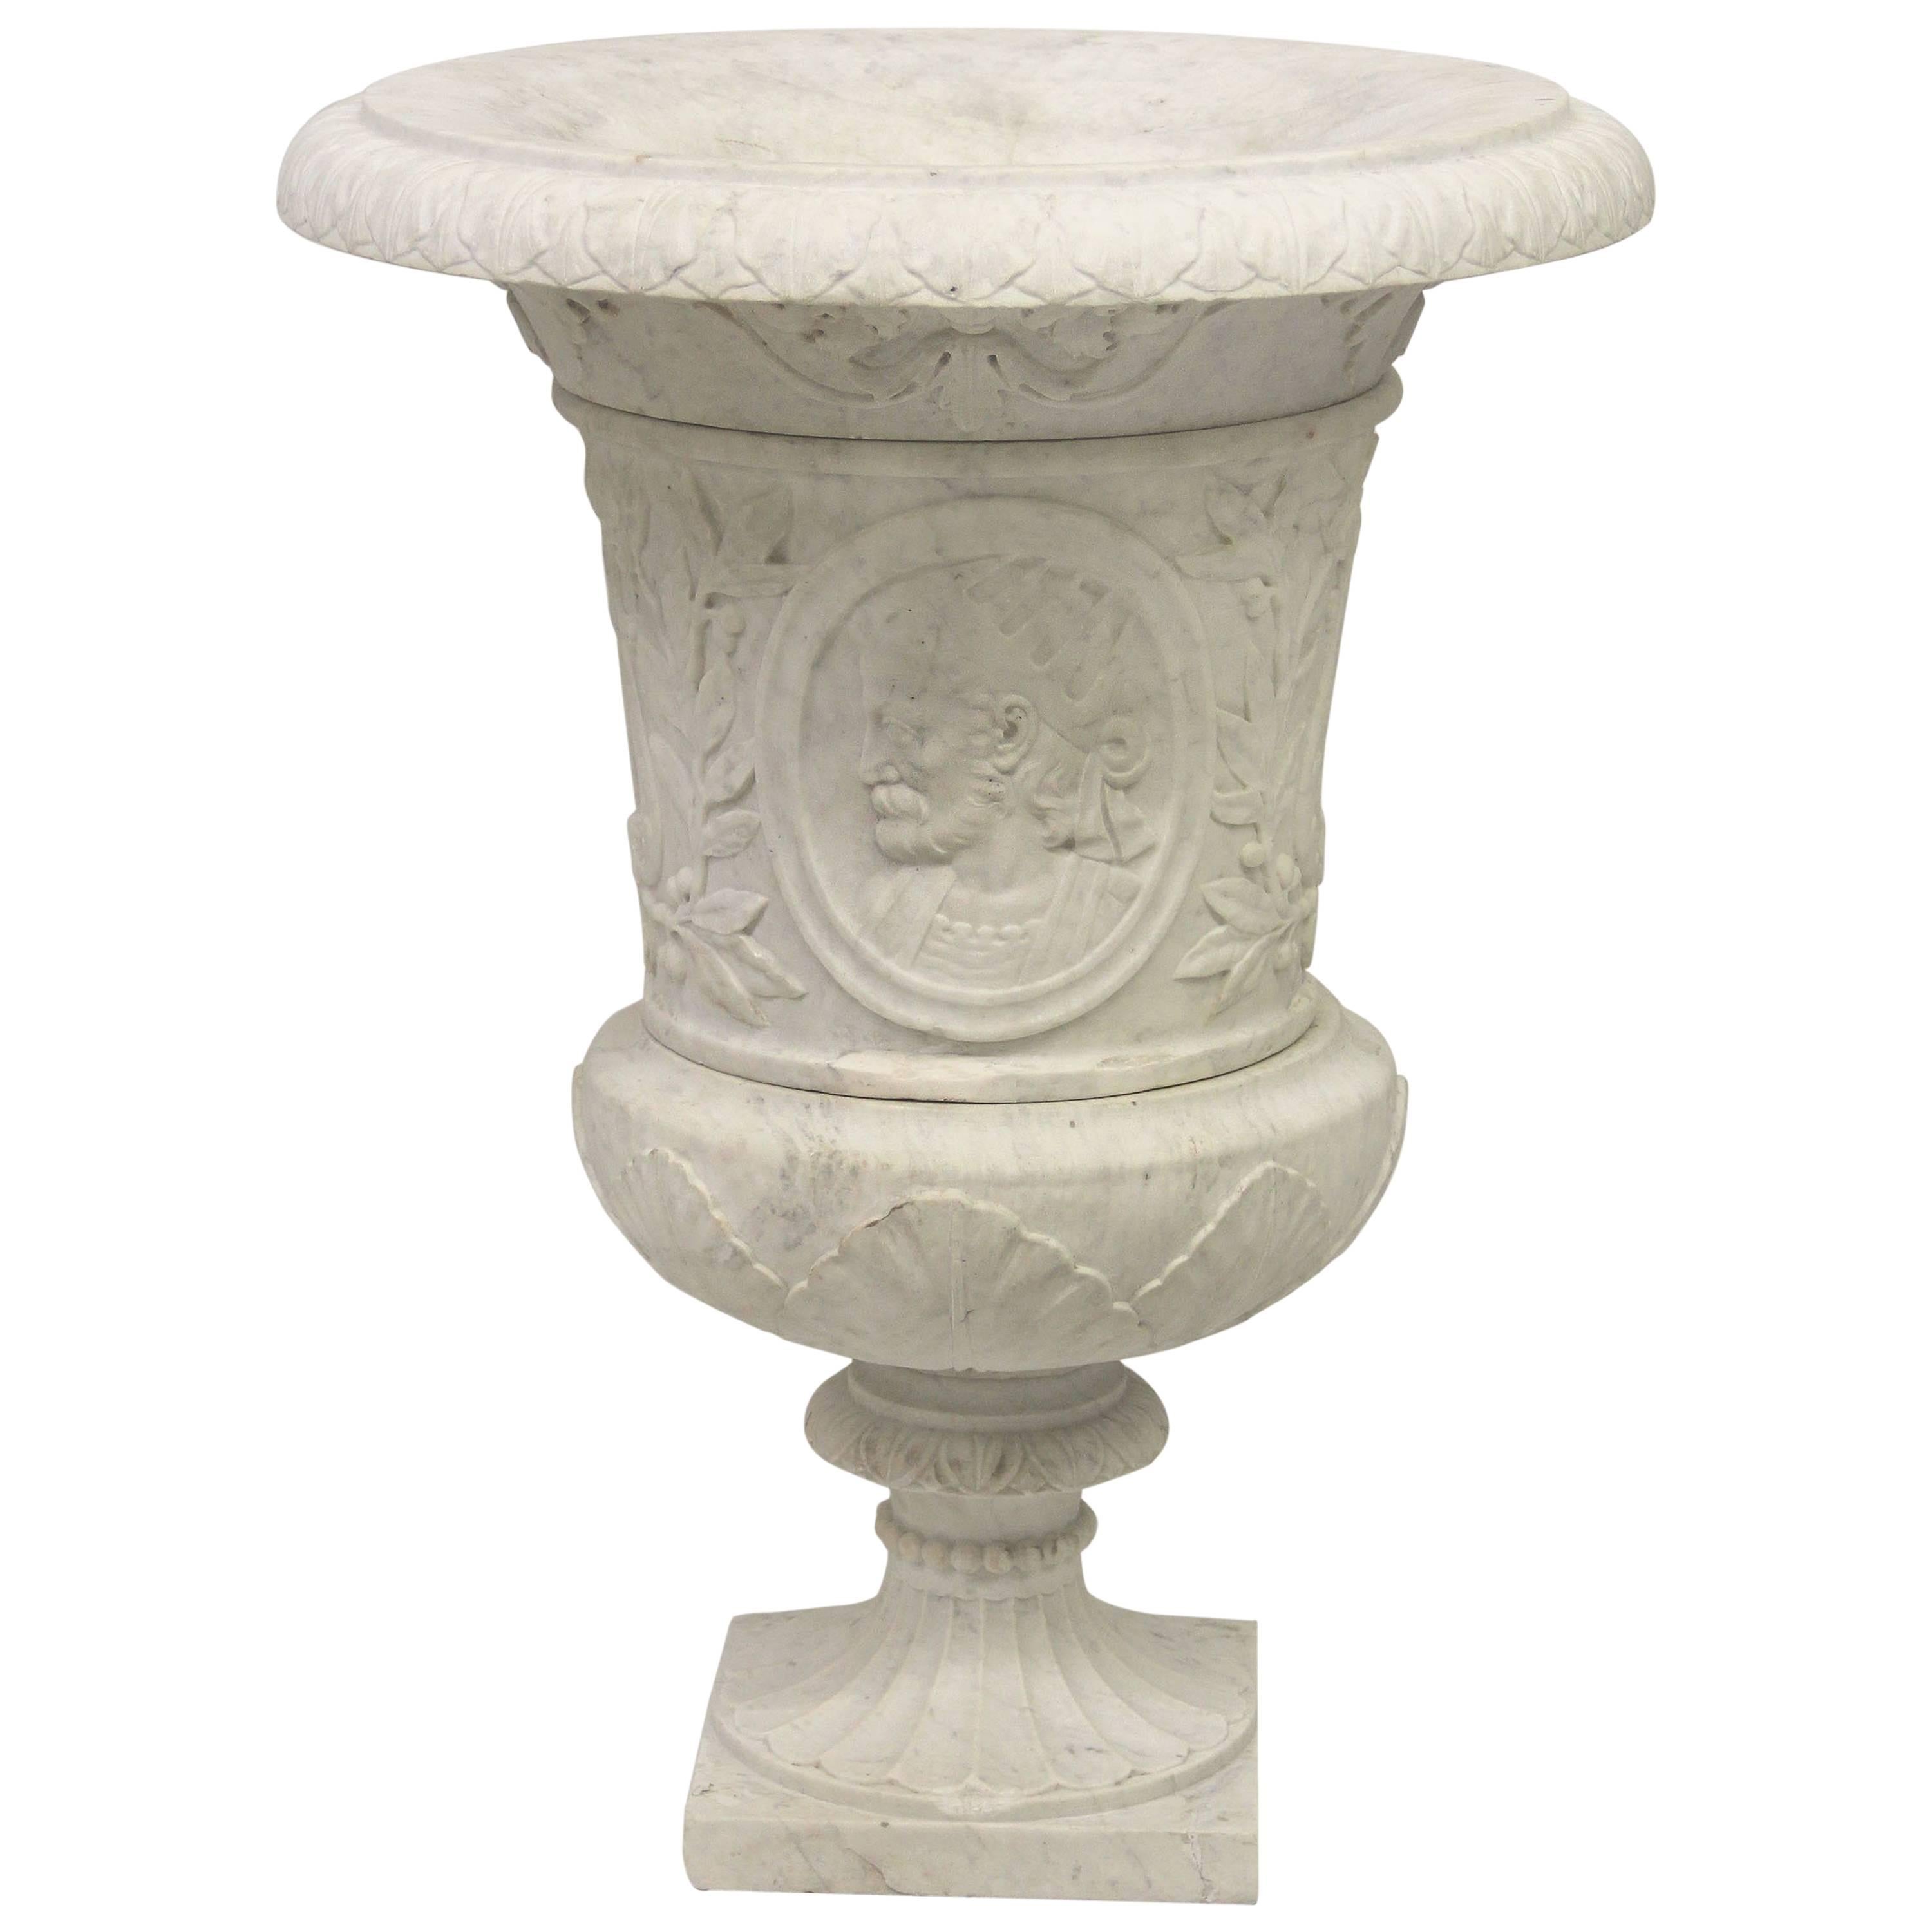 Very Fine Early 20th Century Hand-Carved Carrera Marble Urn